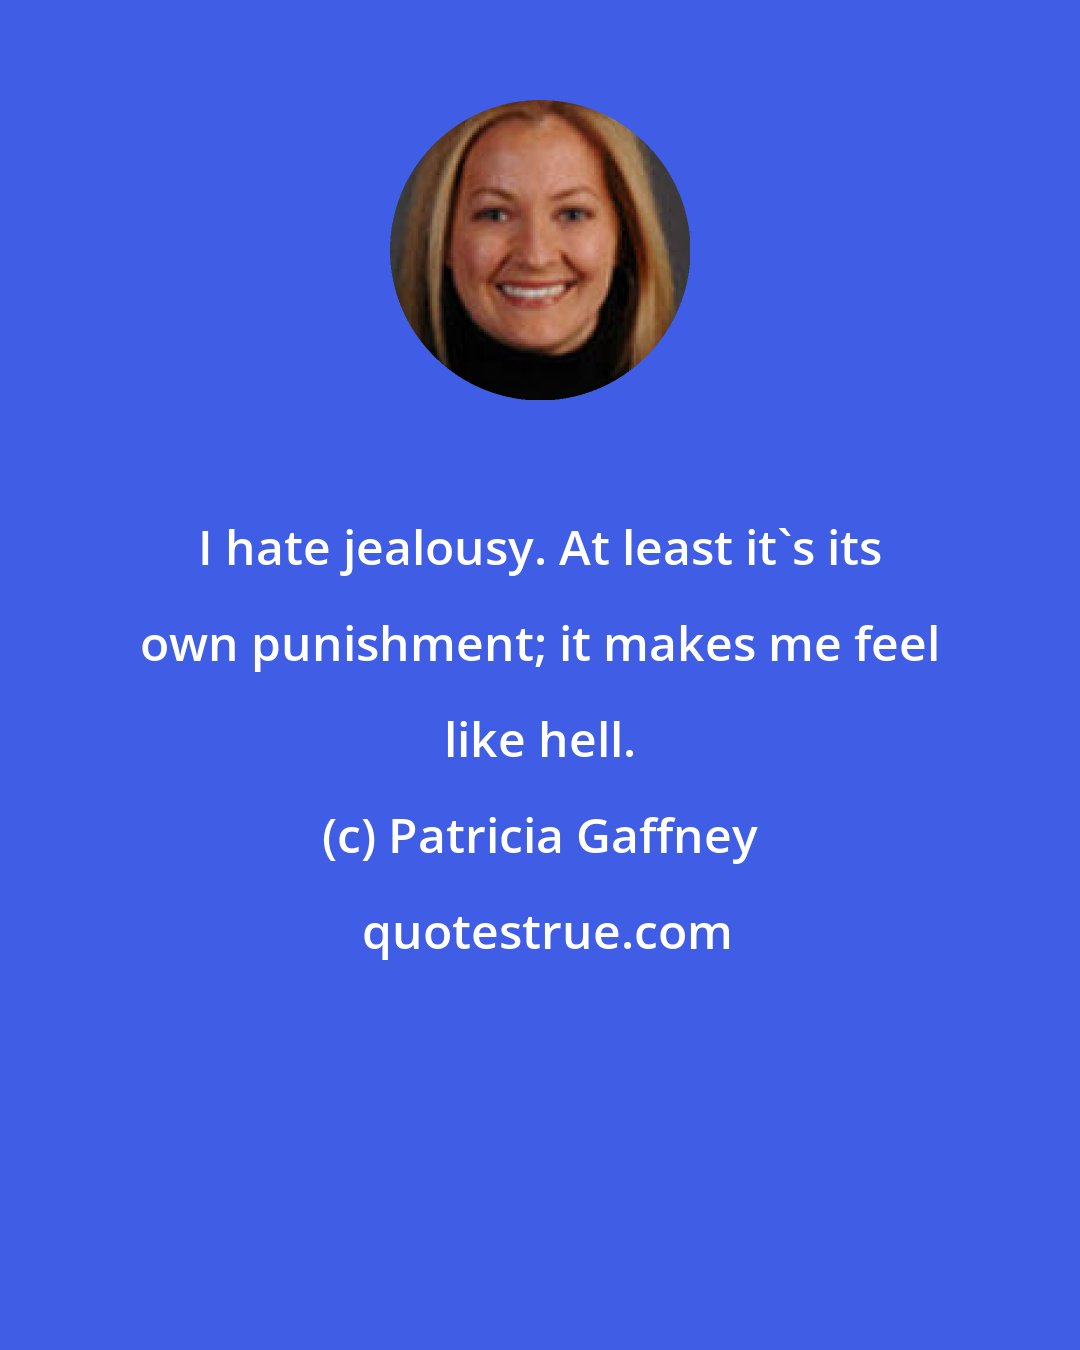 Patricia Gaffney: I hate jealousy. At least it's its own punishment; it makes me feel like hell.